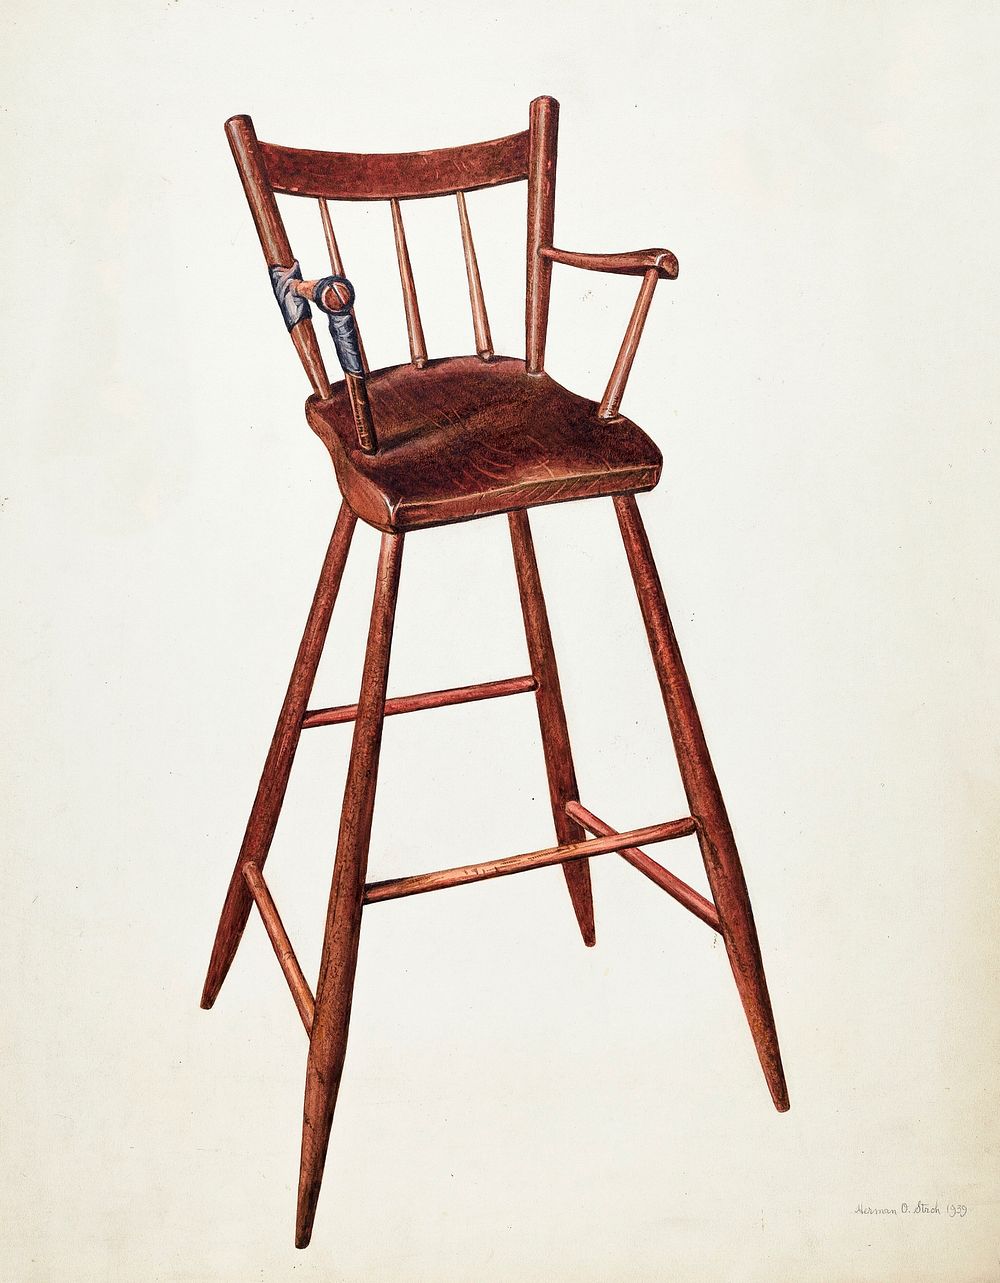 Child's High Chair (1939) by Herman O. Stroh. Original from The National Gallery of Art. Digitally enhanced by rawpixel.